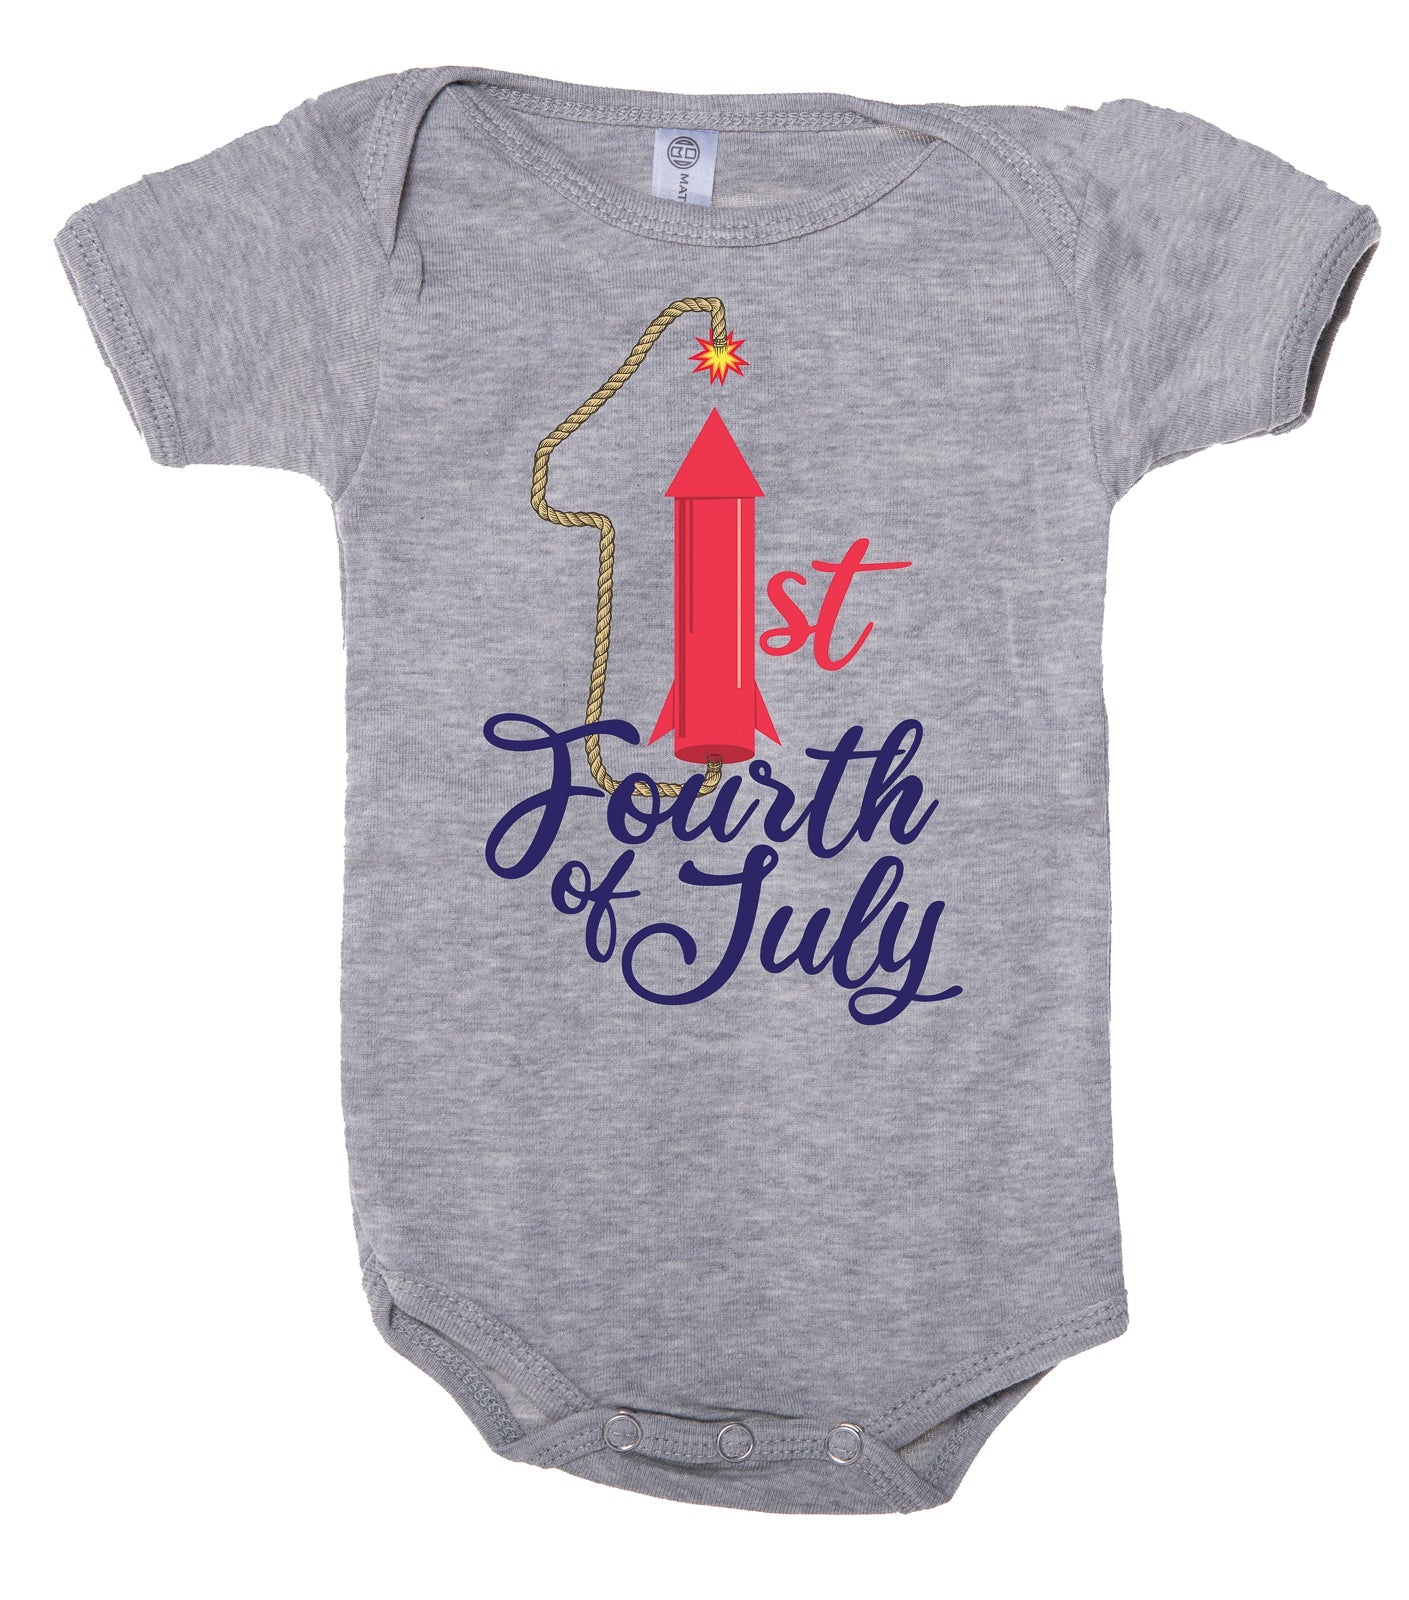 Shirt - My 1st 4th Of July Shirt, Baby One-piece, USA Baby Baby Romper